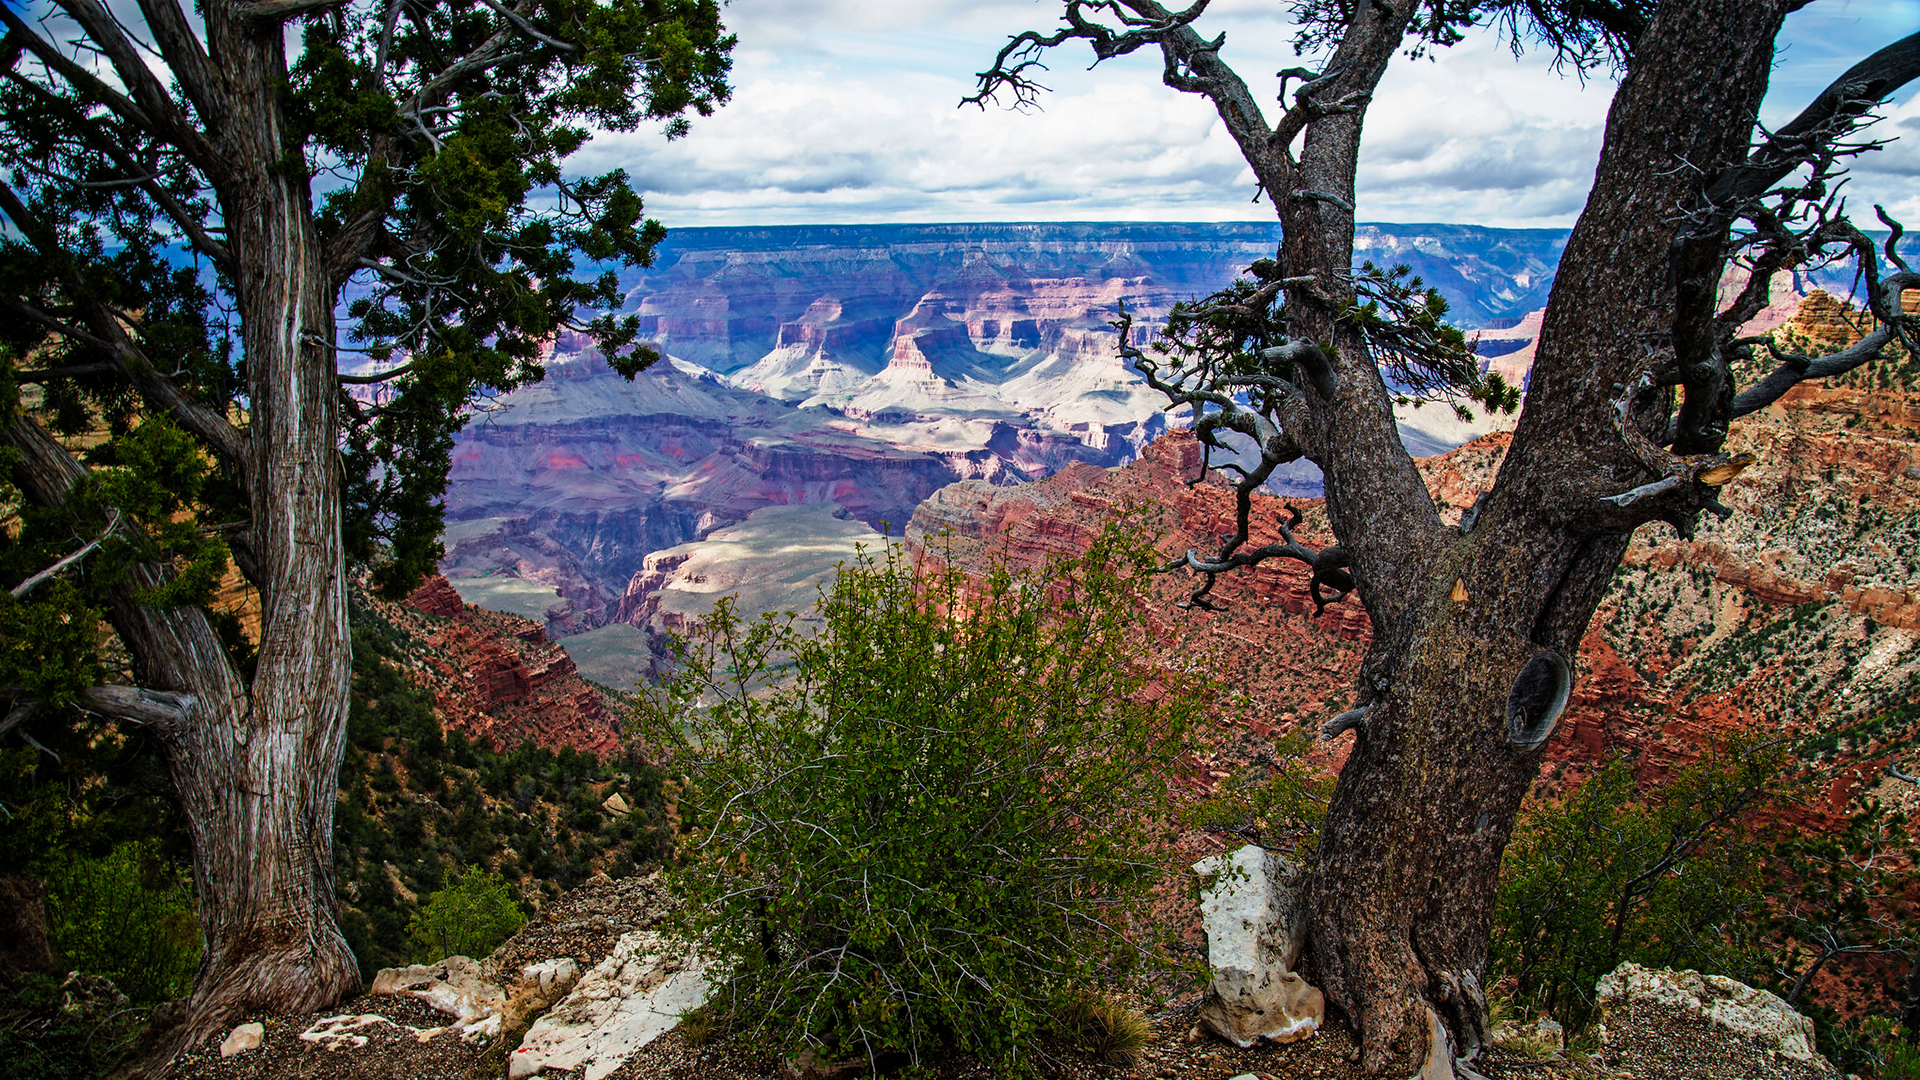 Airstream-Portable-Park-View-of-the-Grand-Canyon